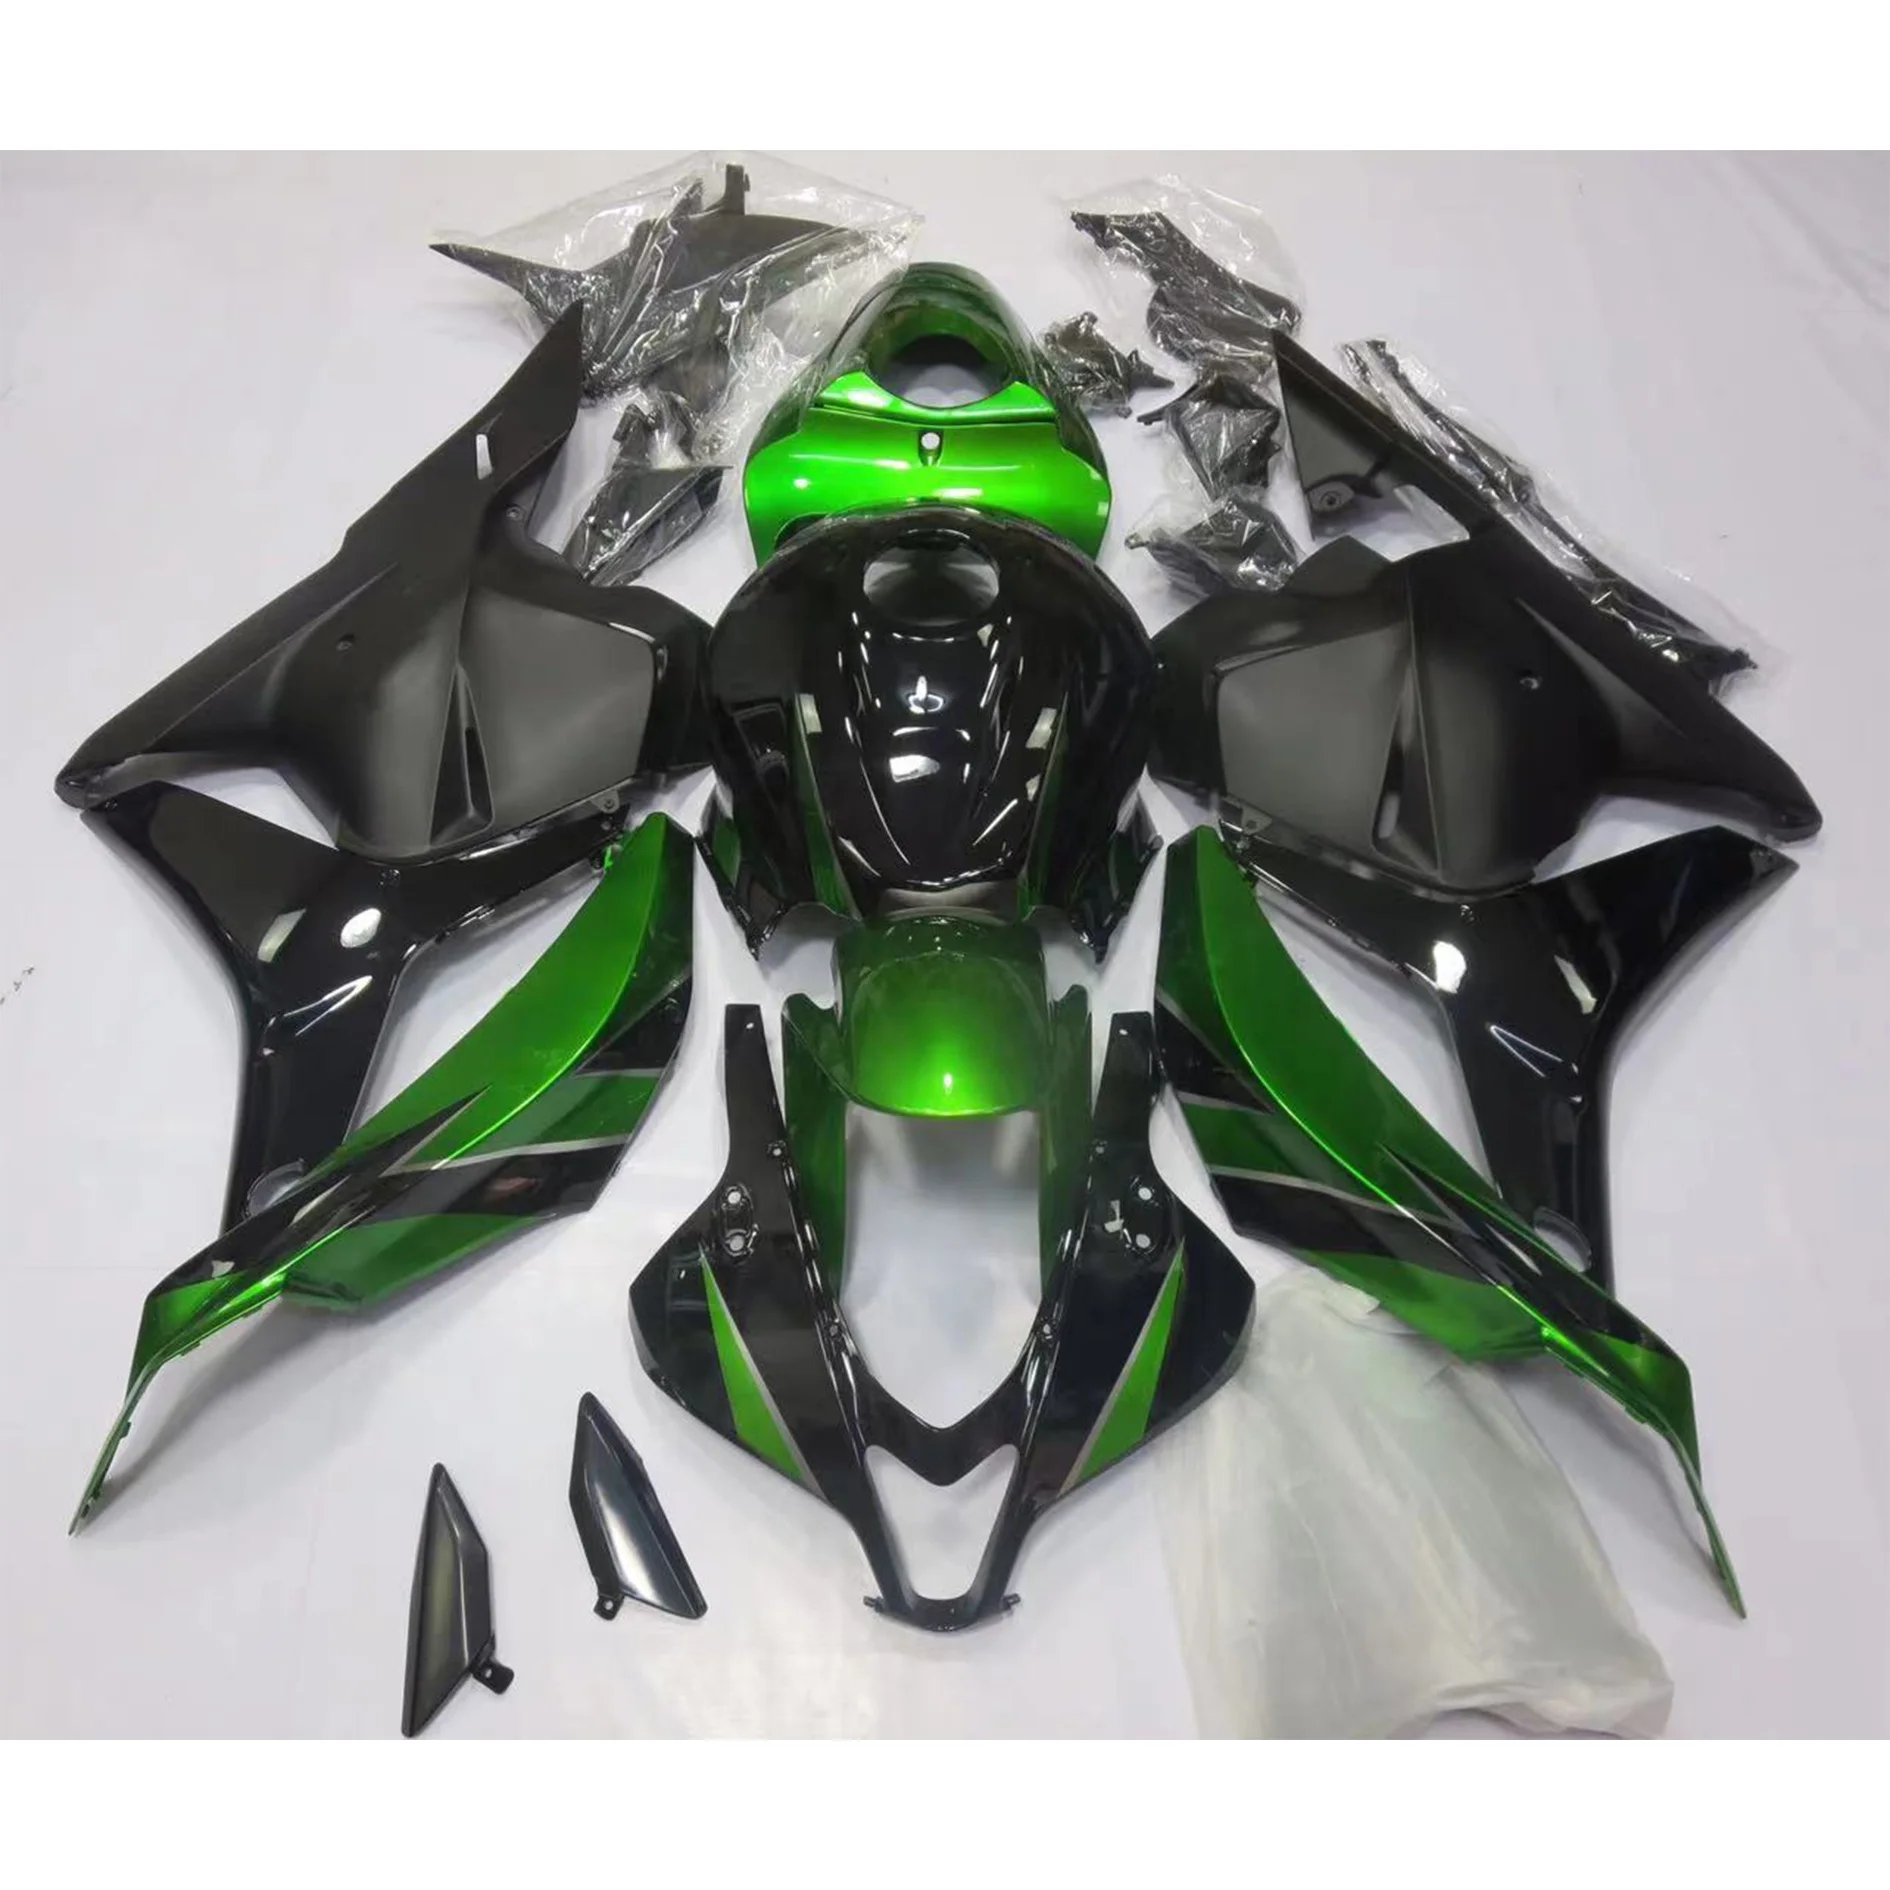 

2022 WHSC Green And Black Motorcycle Accessories For HONDA CBR600 RR 2009-2012 09 10 11 12 Motorcycle Body Systems Fairing Kits, Pictures shown